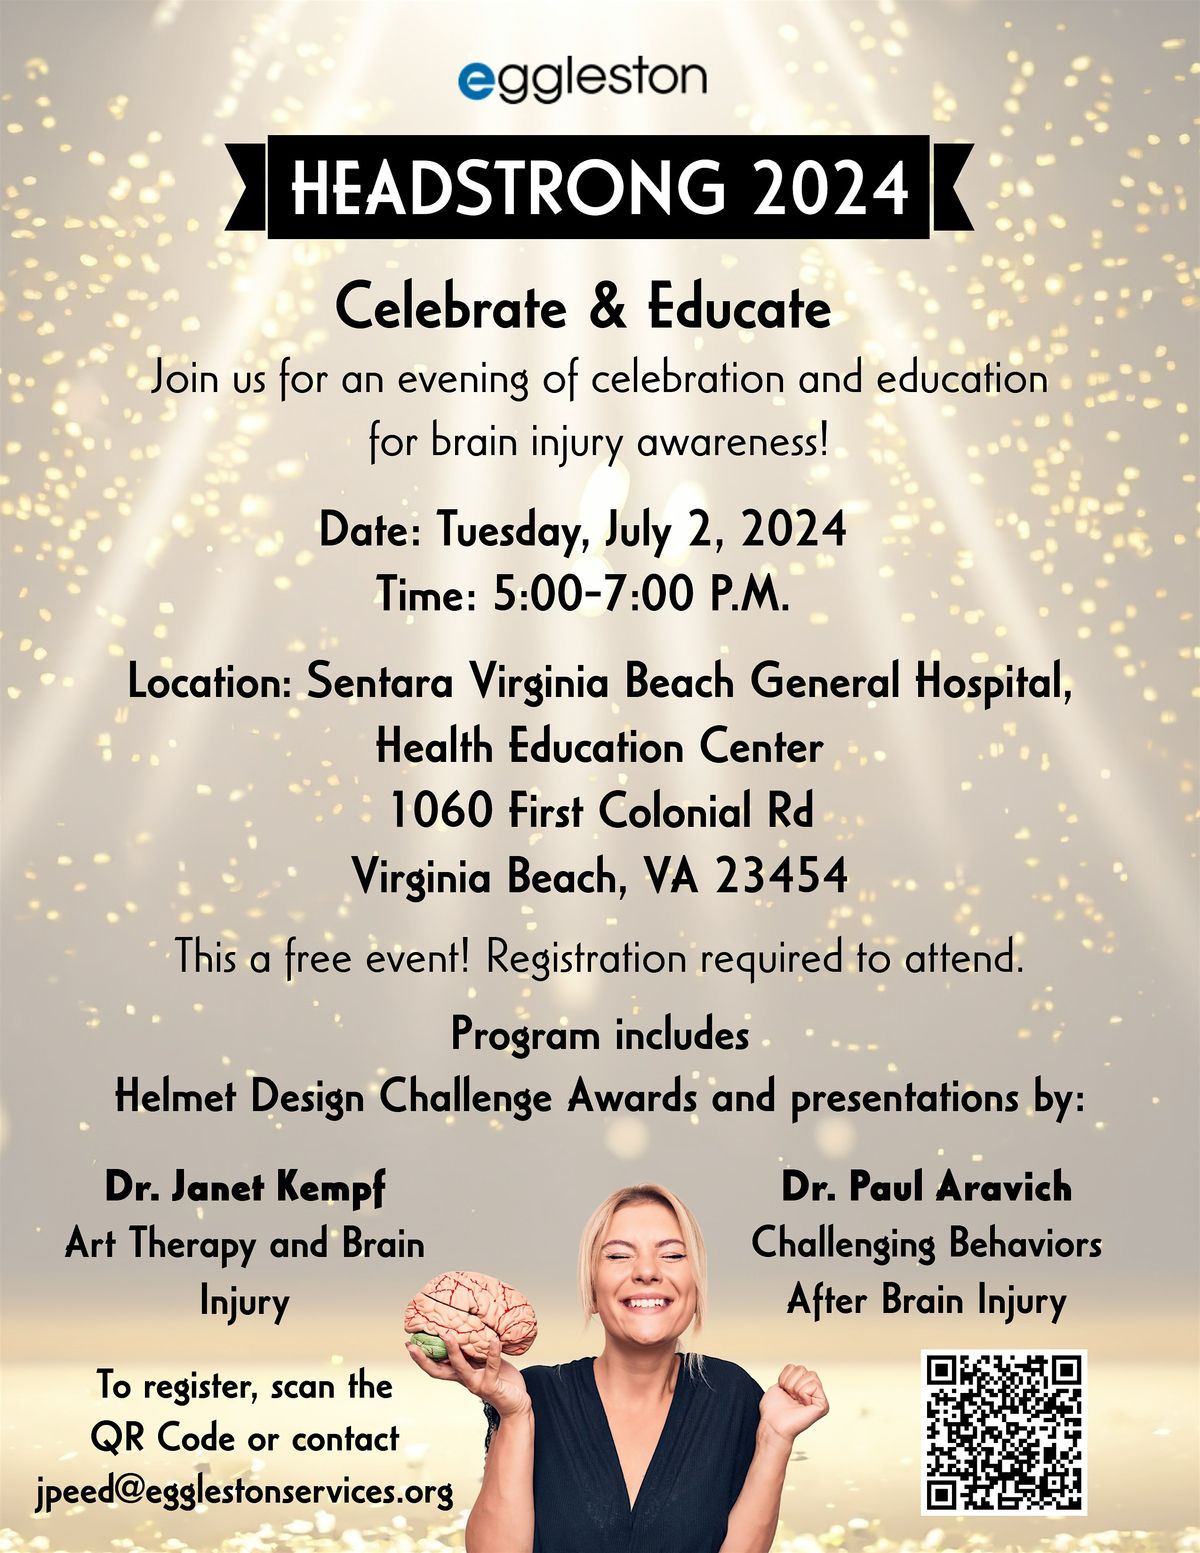 Headstrong 2024: Celebrate & Educate